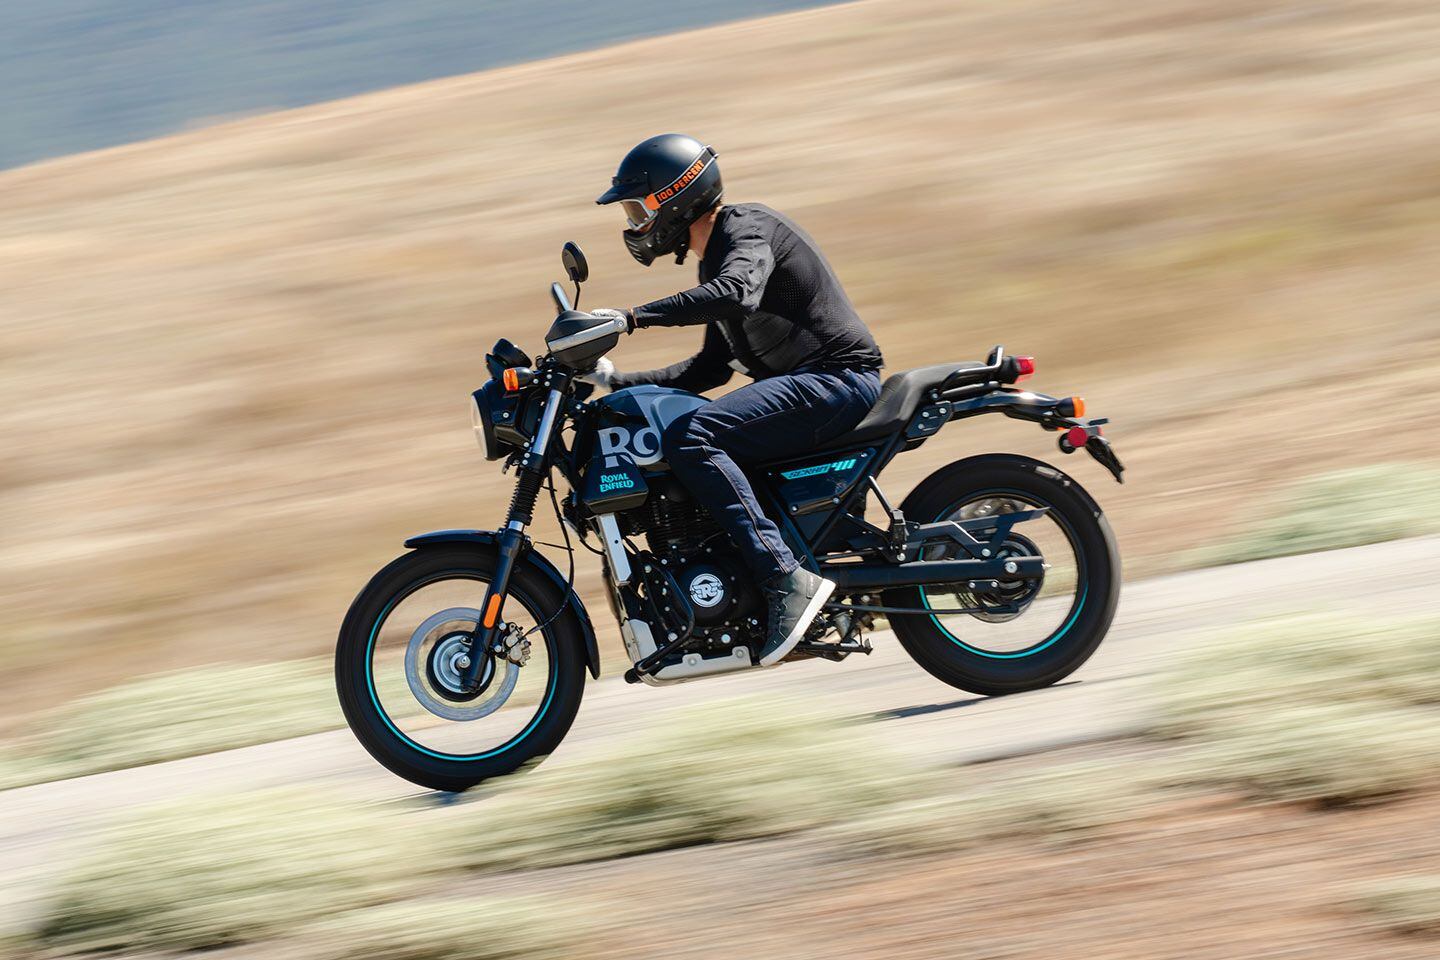 Running through the five-speed gearbox on Royal Enfield’s Scram 411 ($5,099).